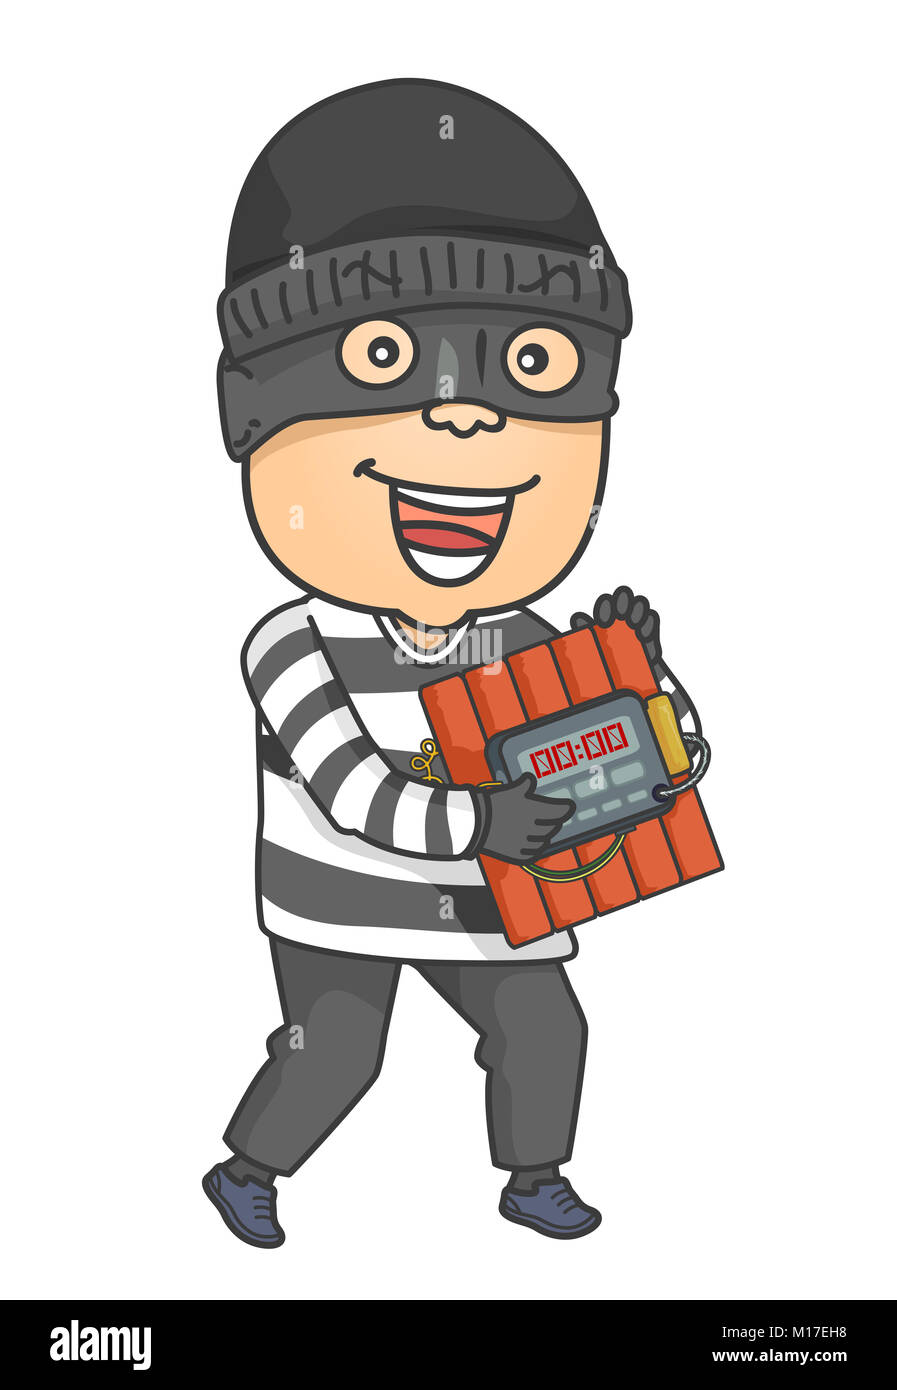 Illustration of a Man in a Ski Mask Carrying a Dynamite Bomb Setting the Detonator Stock Photo